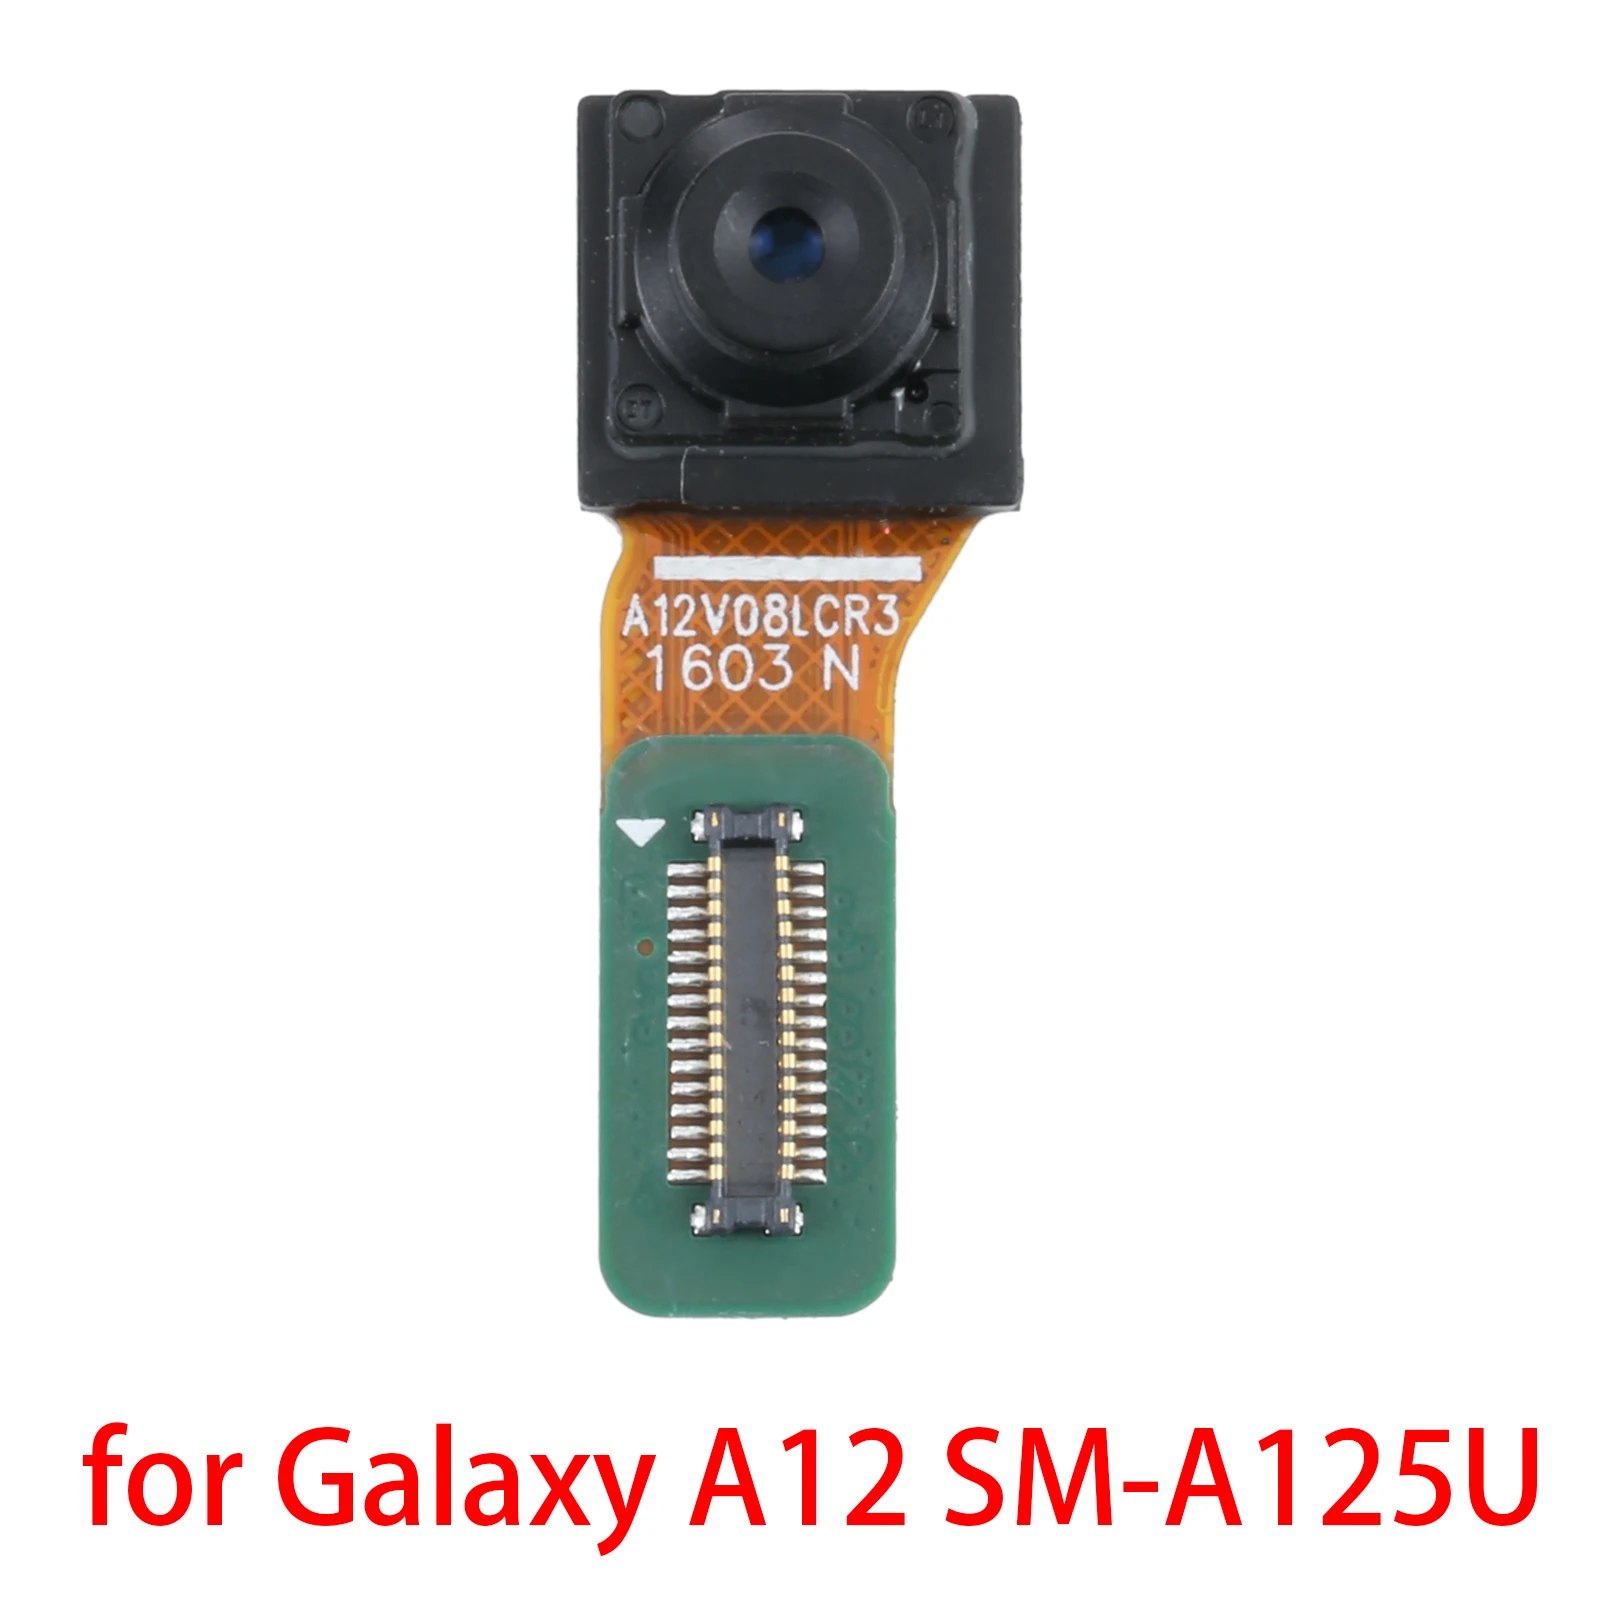 

New For Galaxy A12 Front Facing Camera for Samsung Galaxy A12 SM-A125U (US Version)